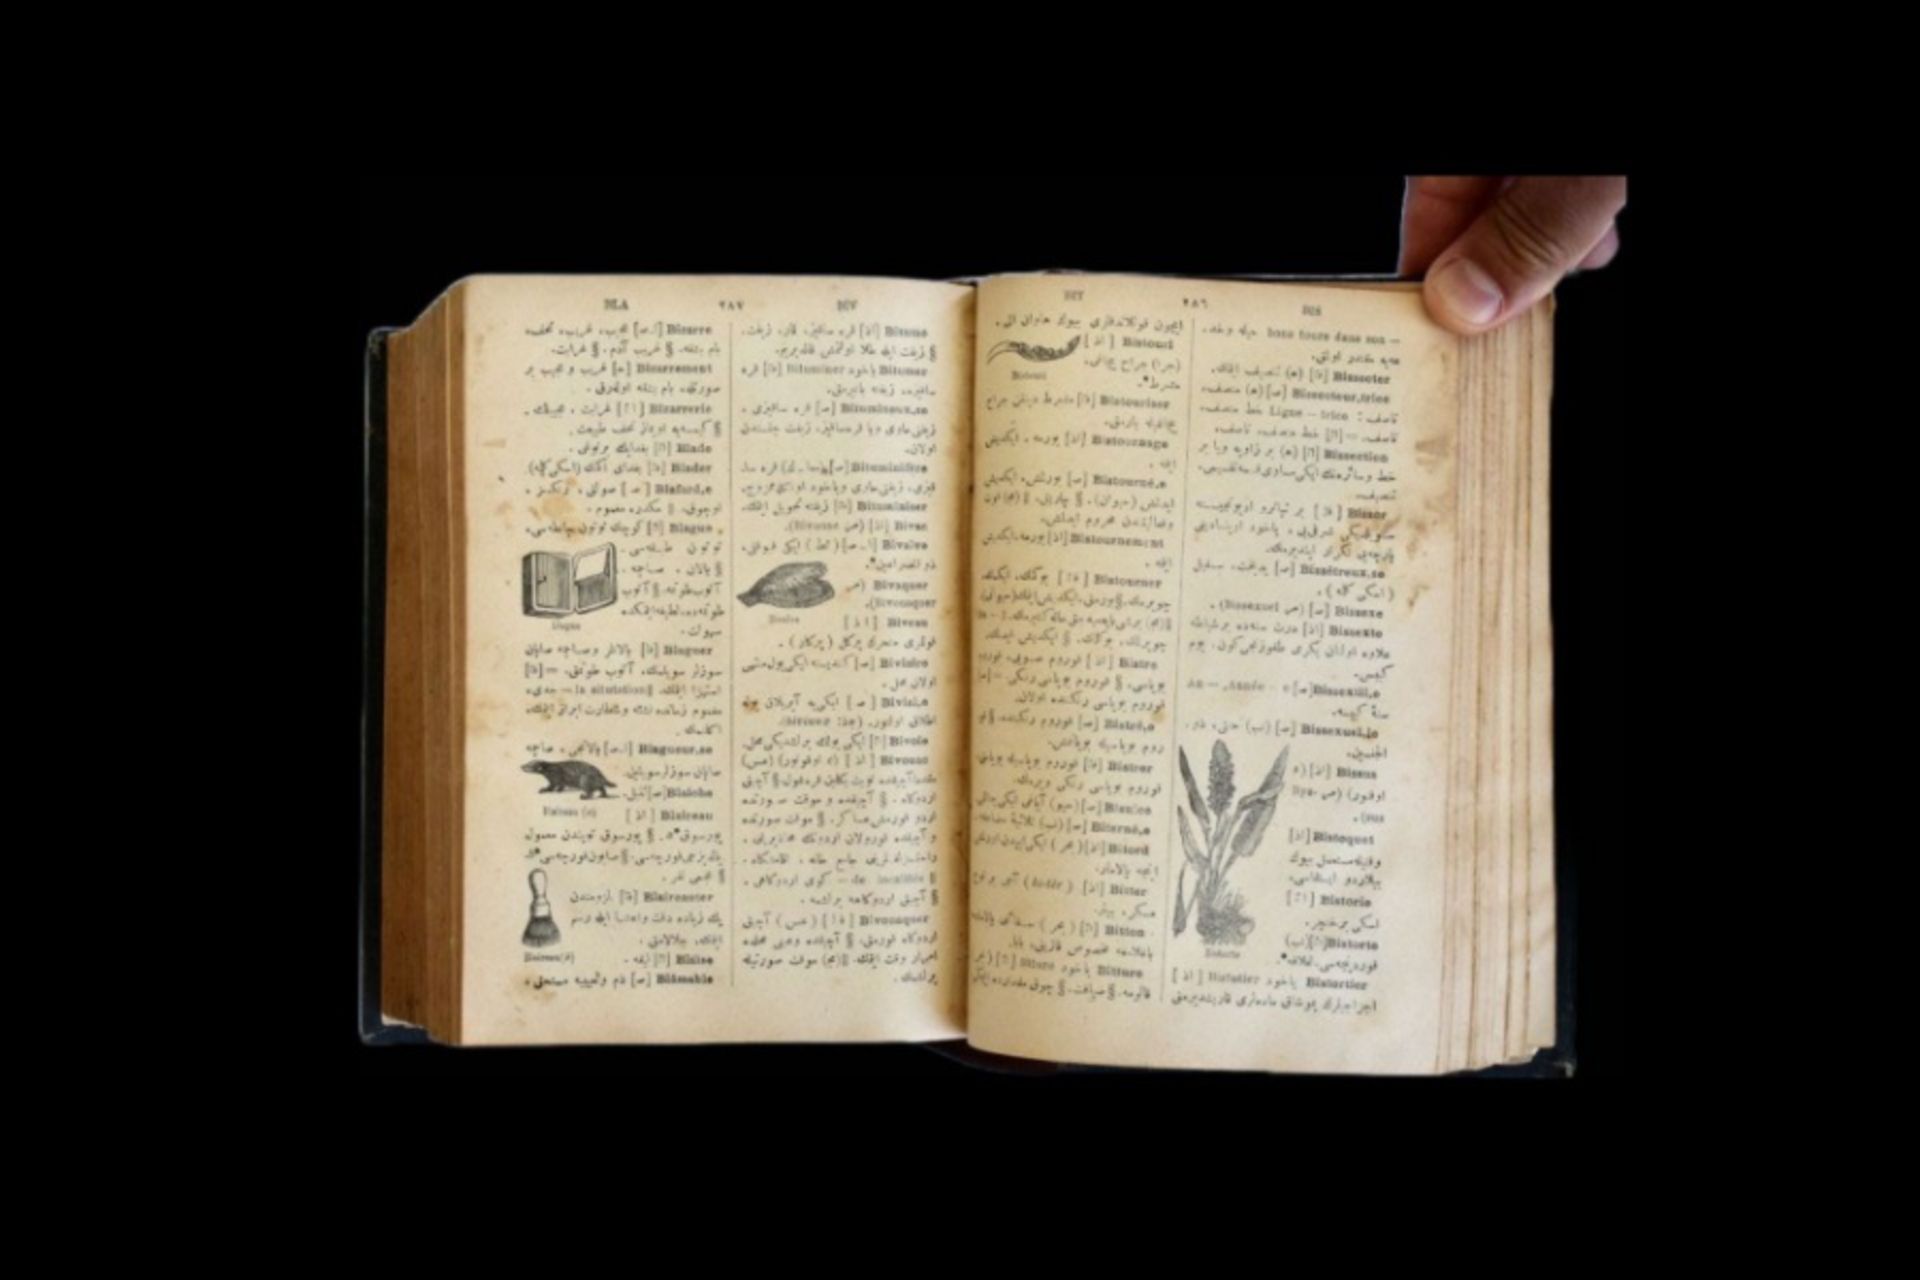 19th century French - Ottoman dictionary - Image 8 of 19